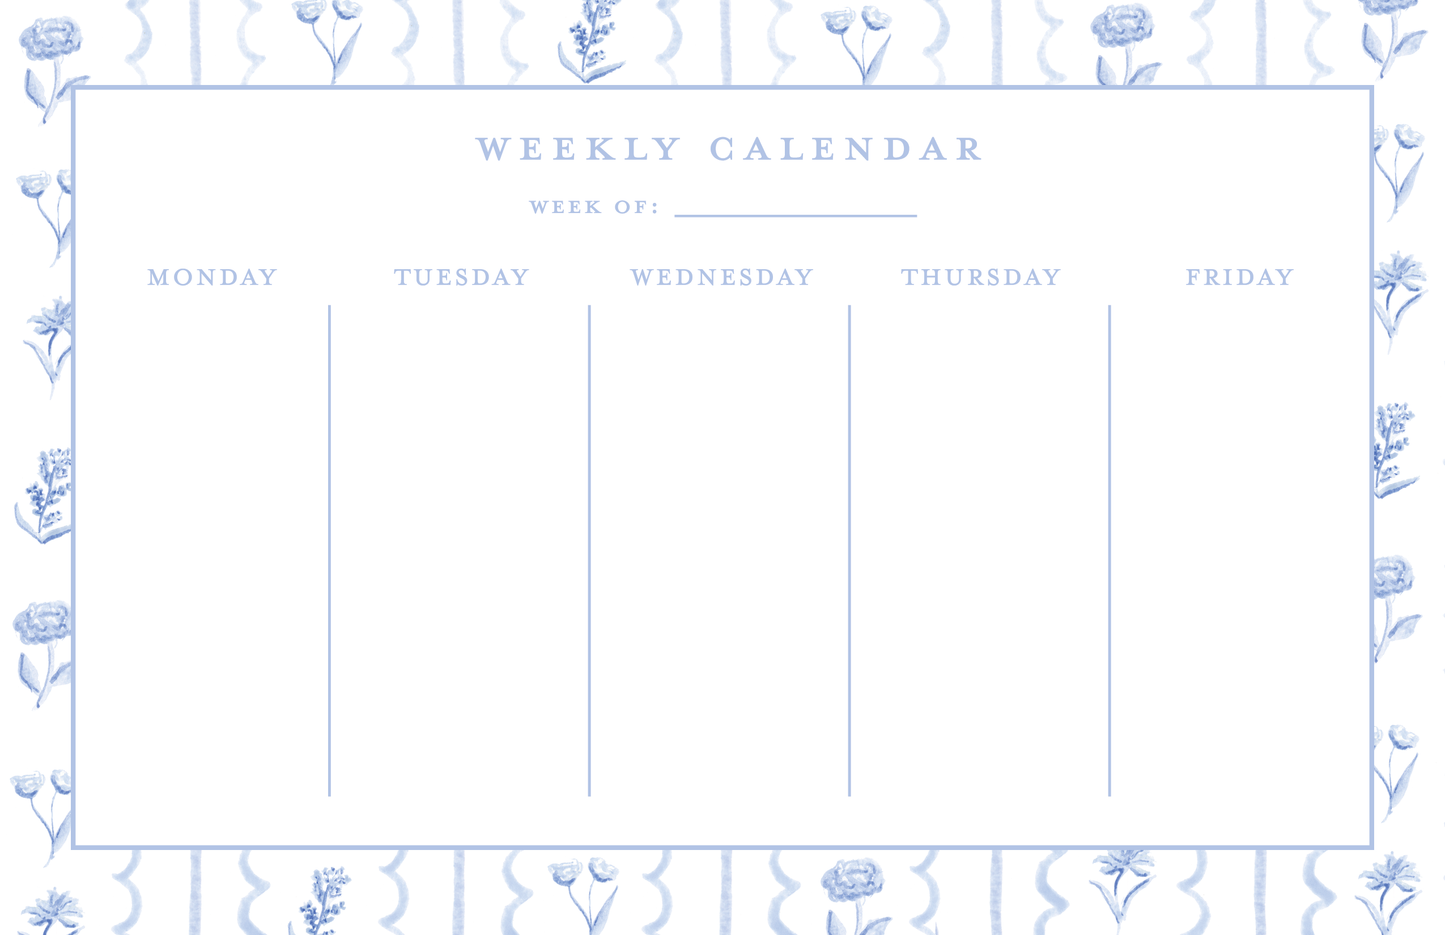 Weekly Calendar Notepad - Blue and White Floral